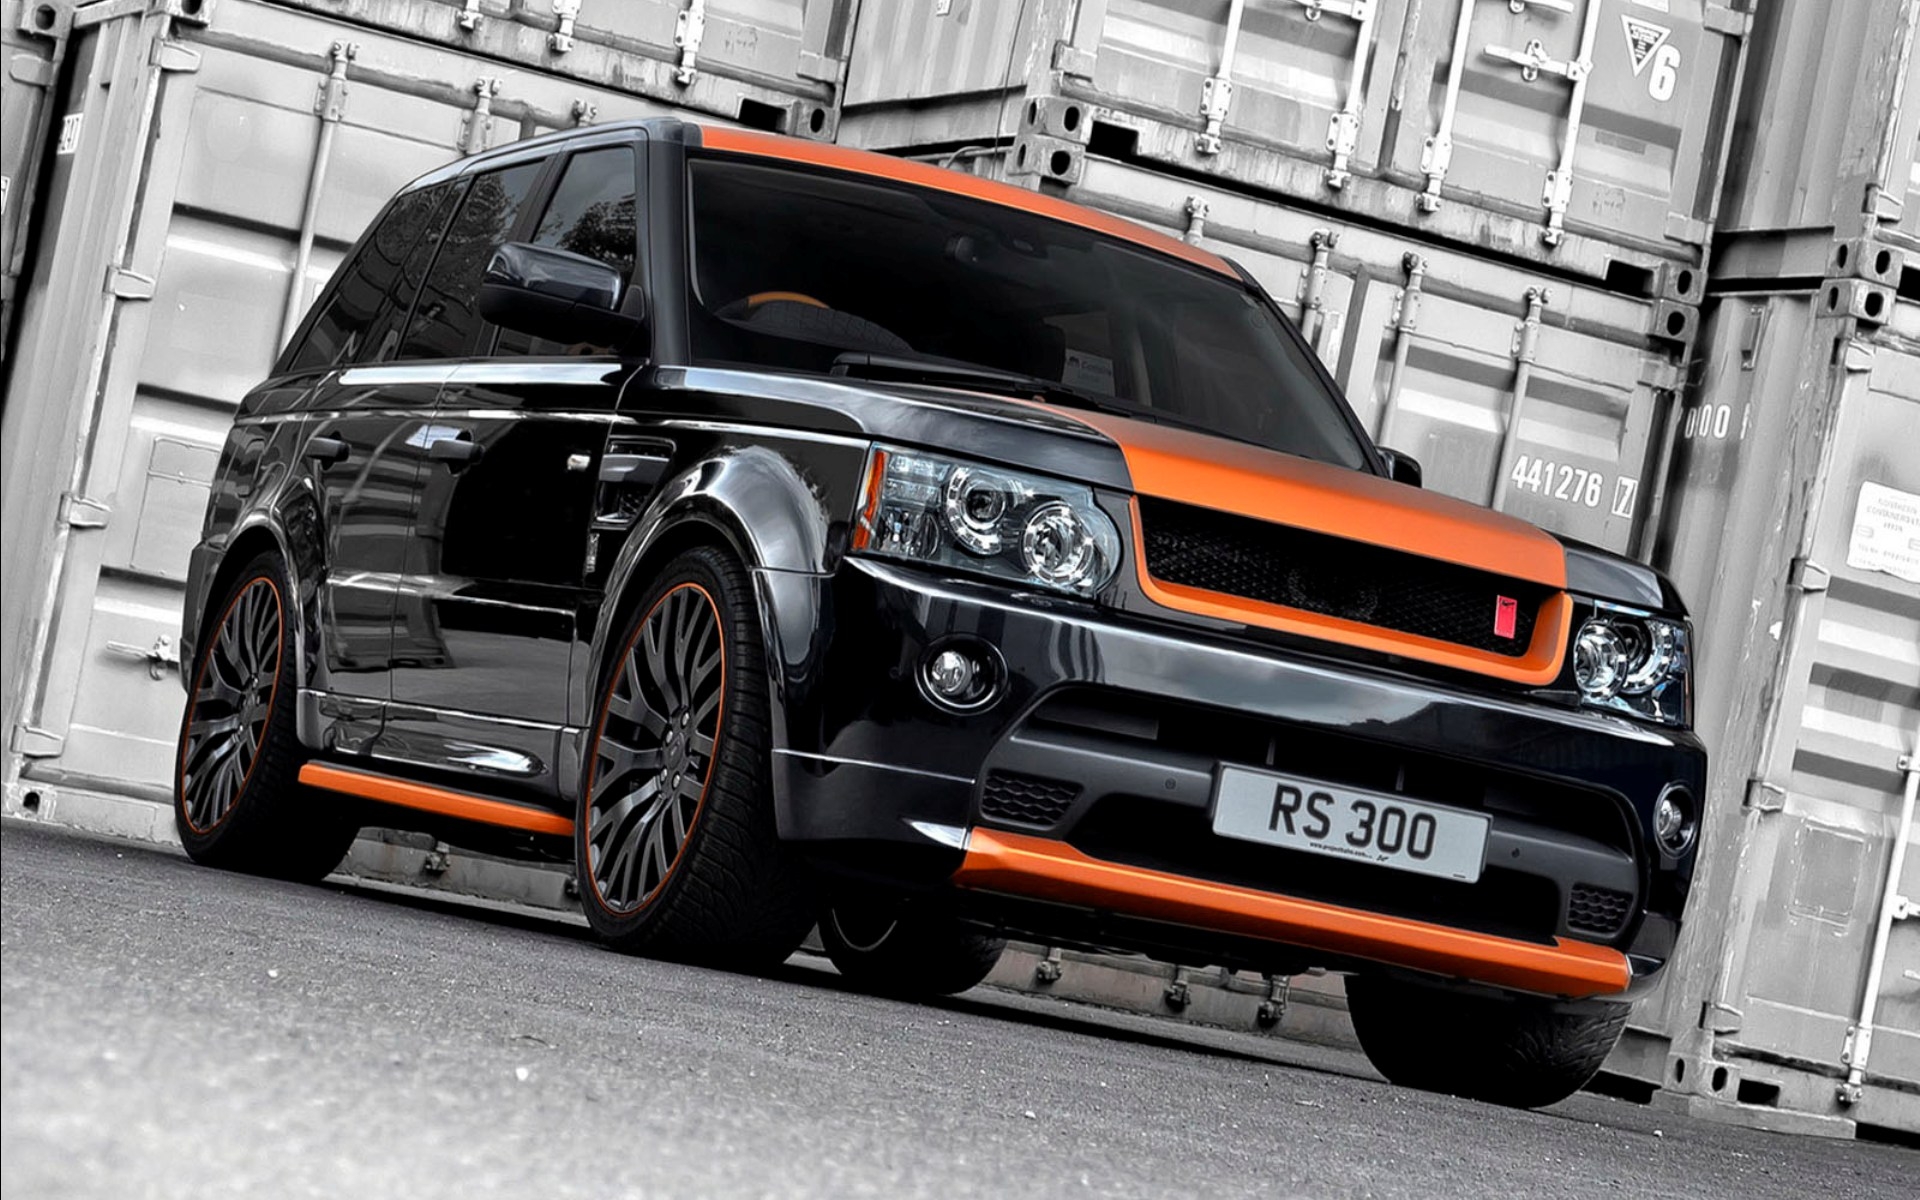 Vehicles Range Rover HD Wallpaper | Background Image